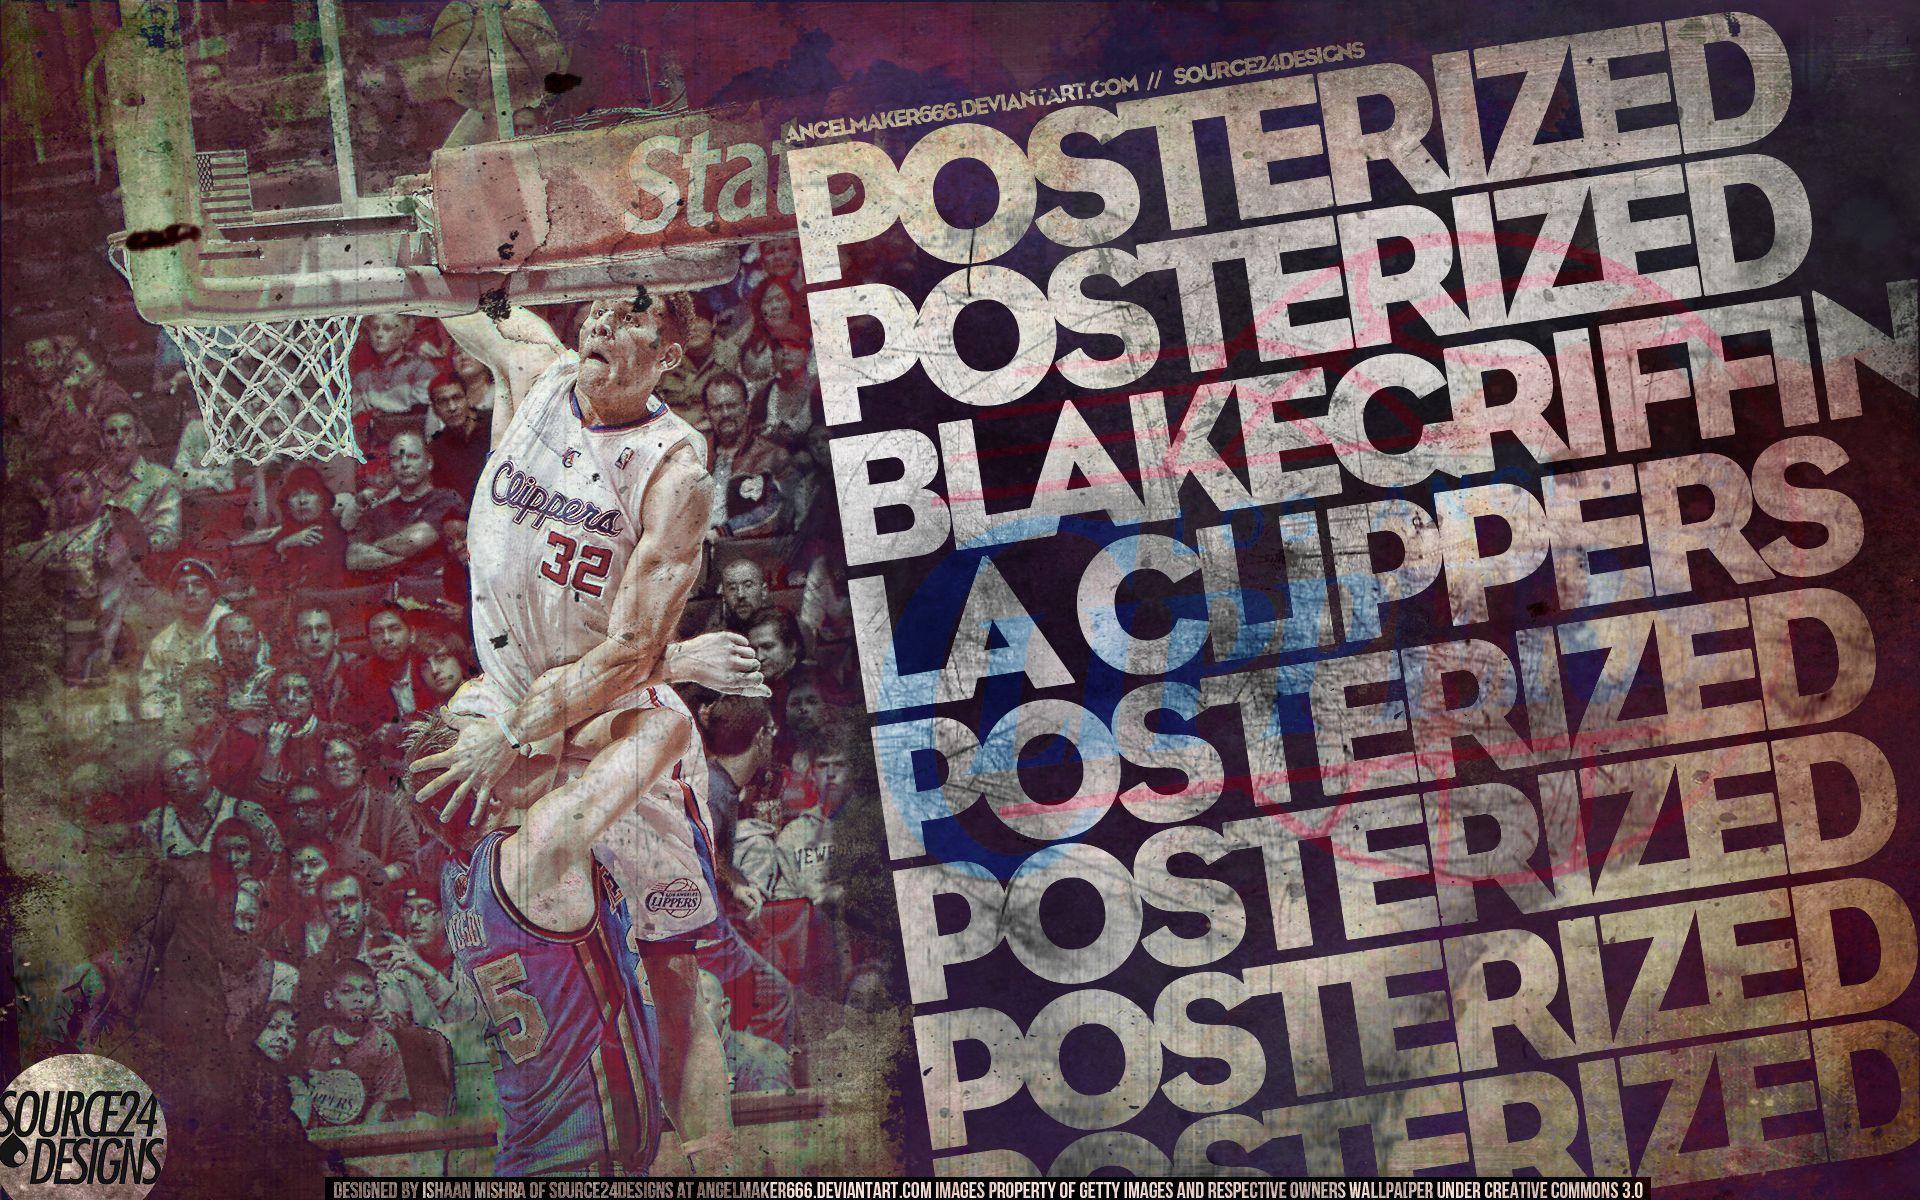 Blake Griffin Posterized